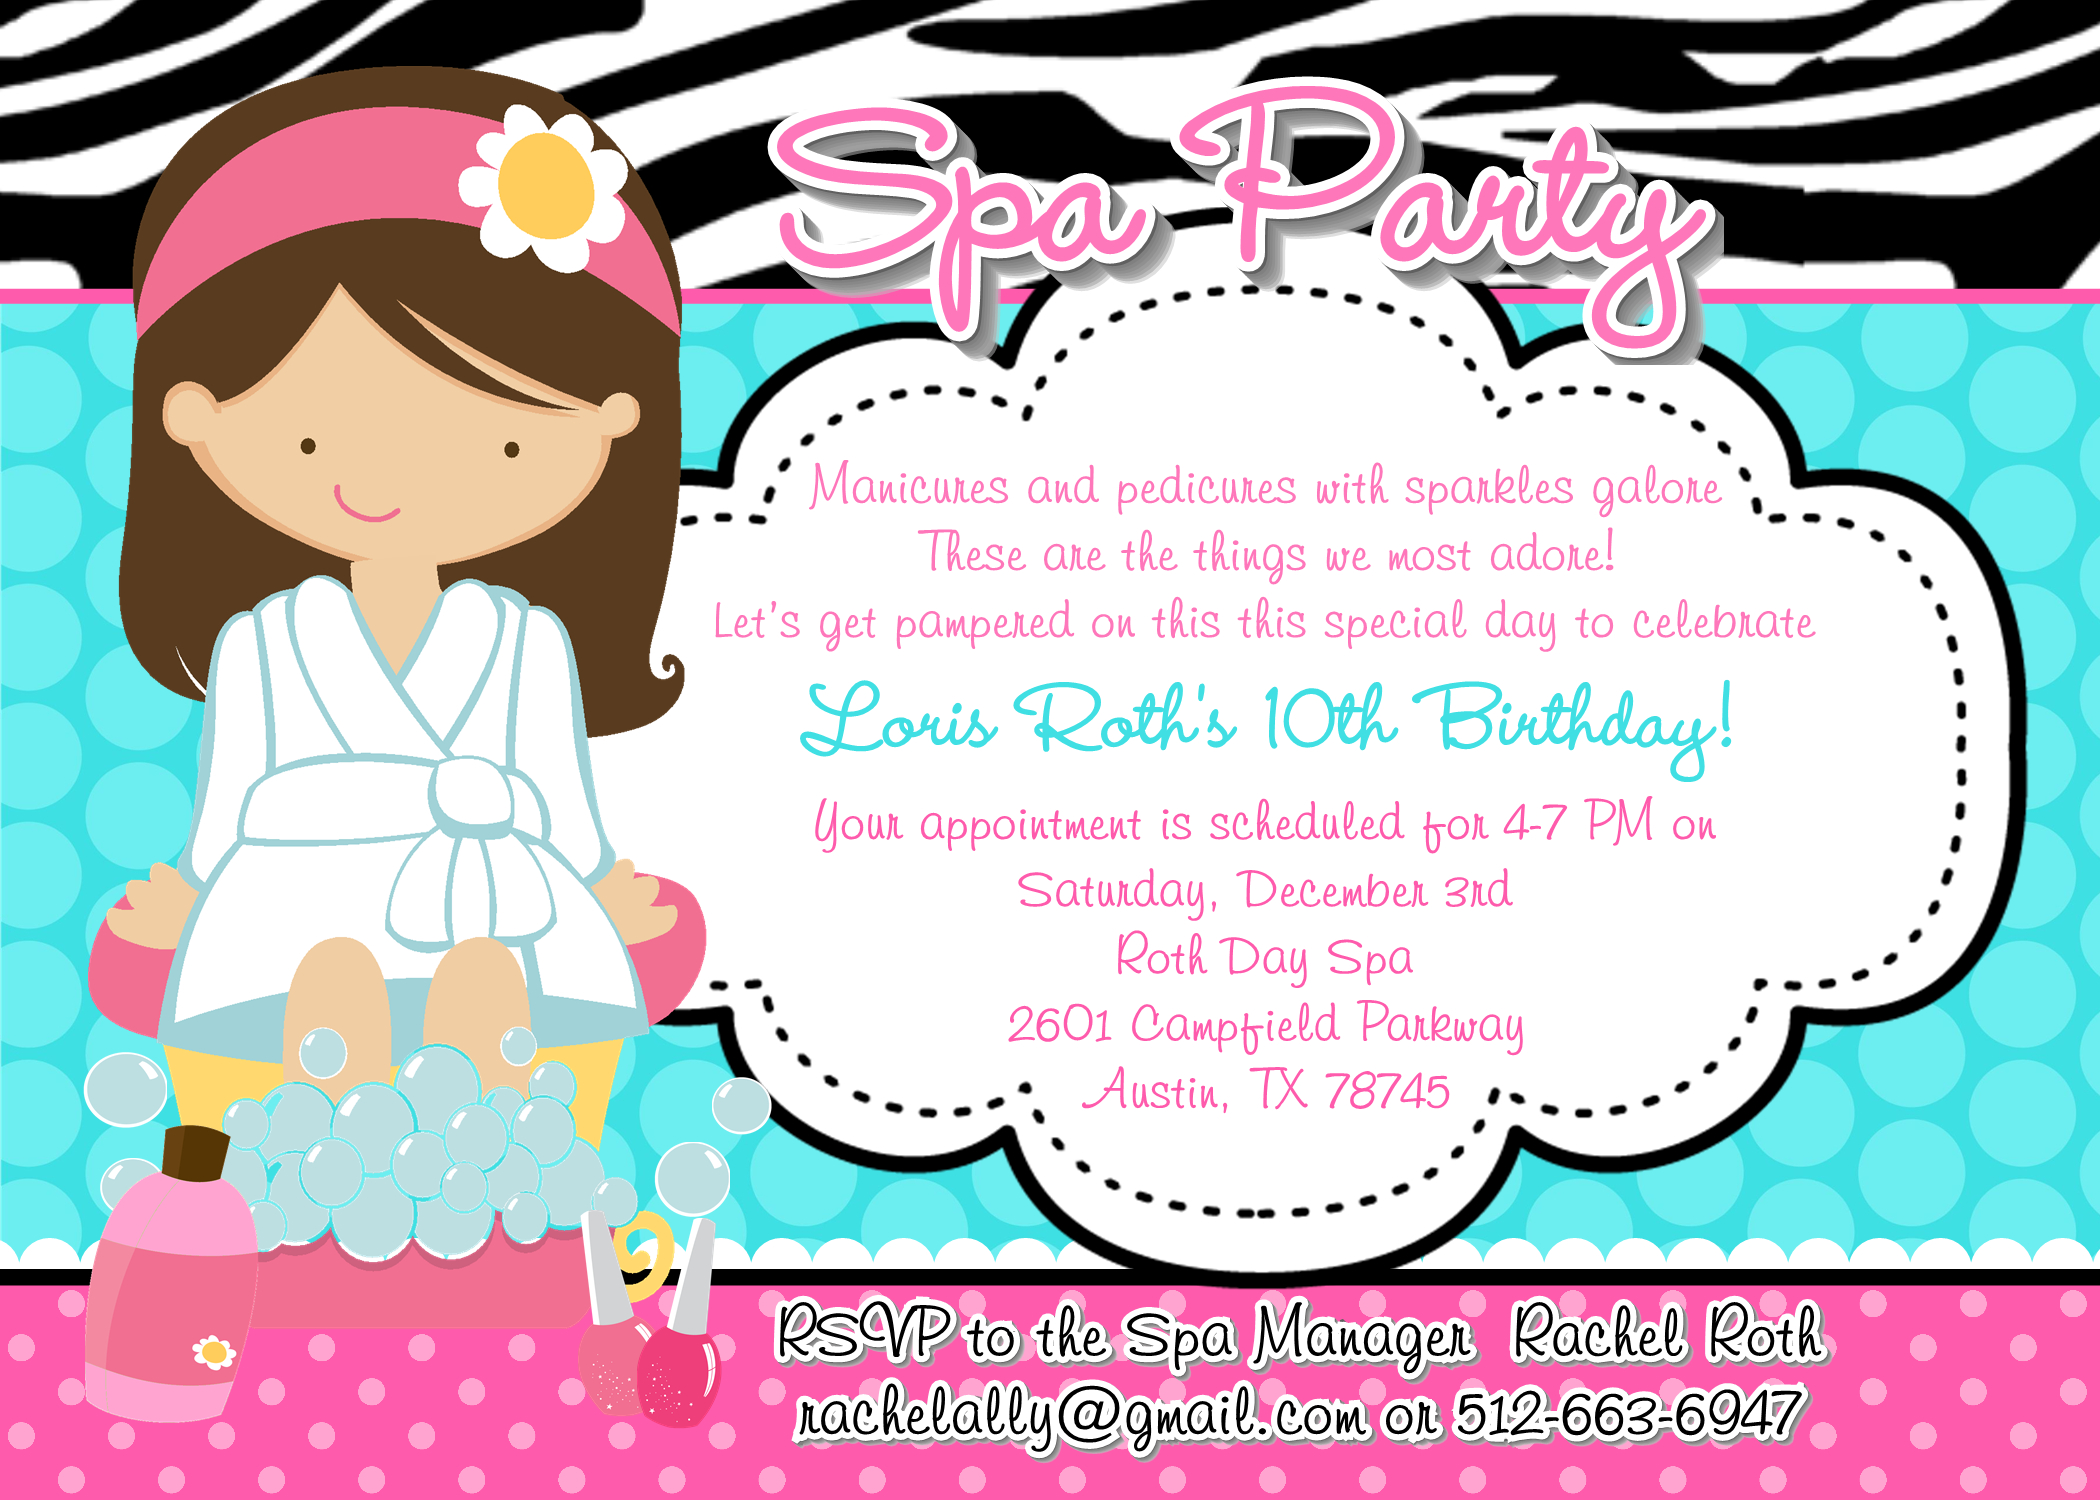 How To Throw An Amazing Spa Party - Shimmy Shimmy Cake! dedans Salon Be Happy Invitation